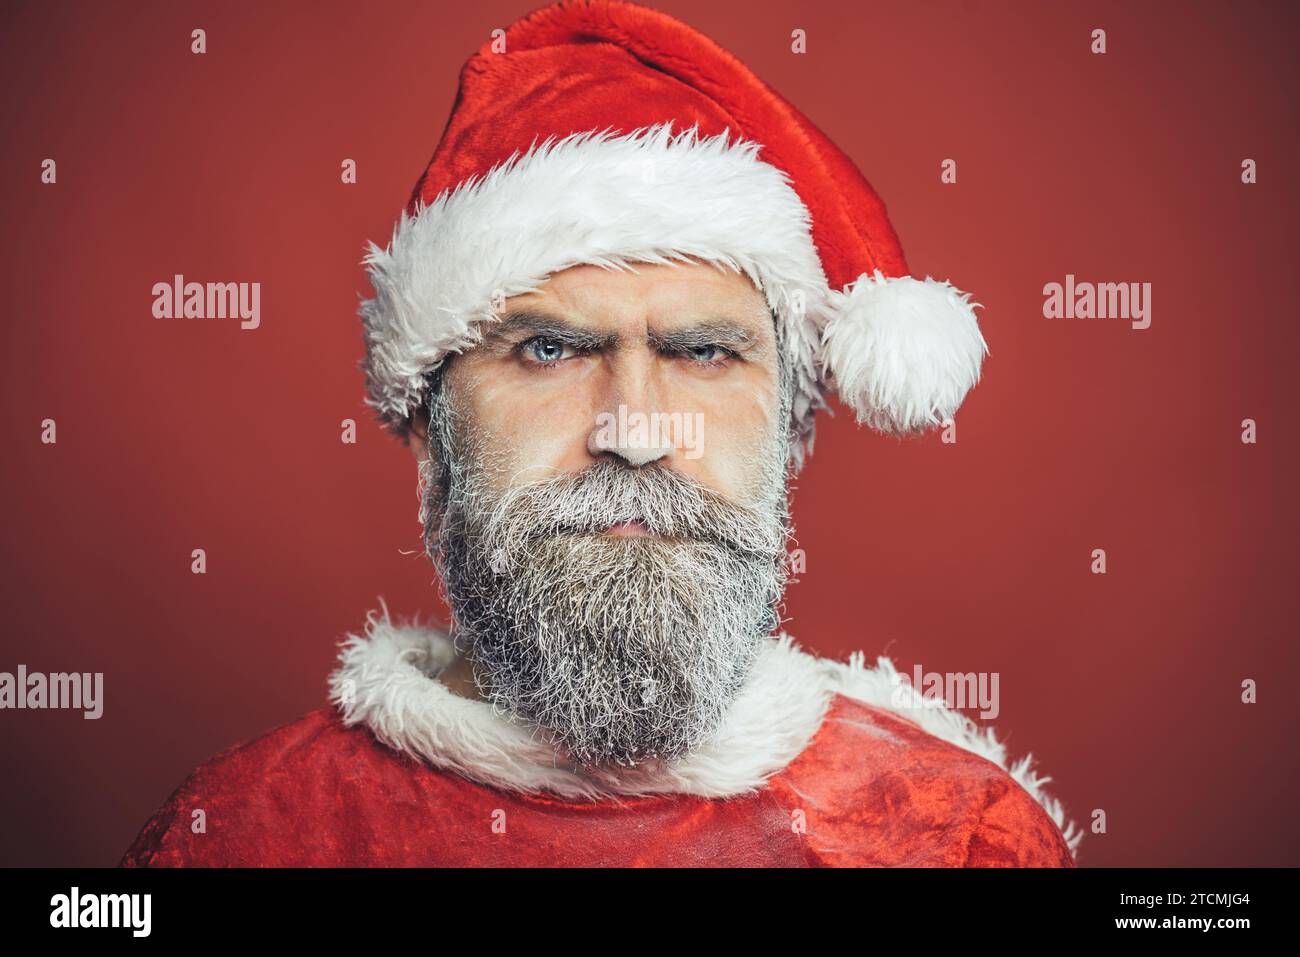 Christmastime. Winter holiday celebration. Merry Christmas and Happy New Year. Closeup portrait of Santa Claus with snowy beard. Serious bearded man Stock Photo